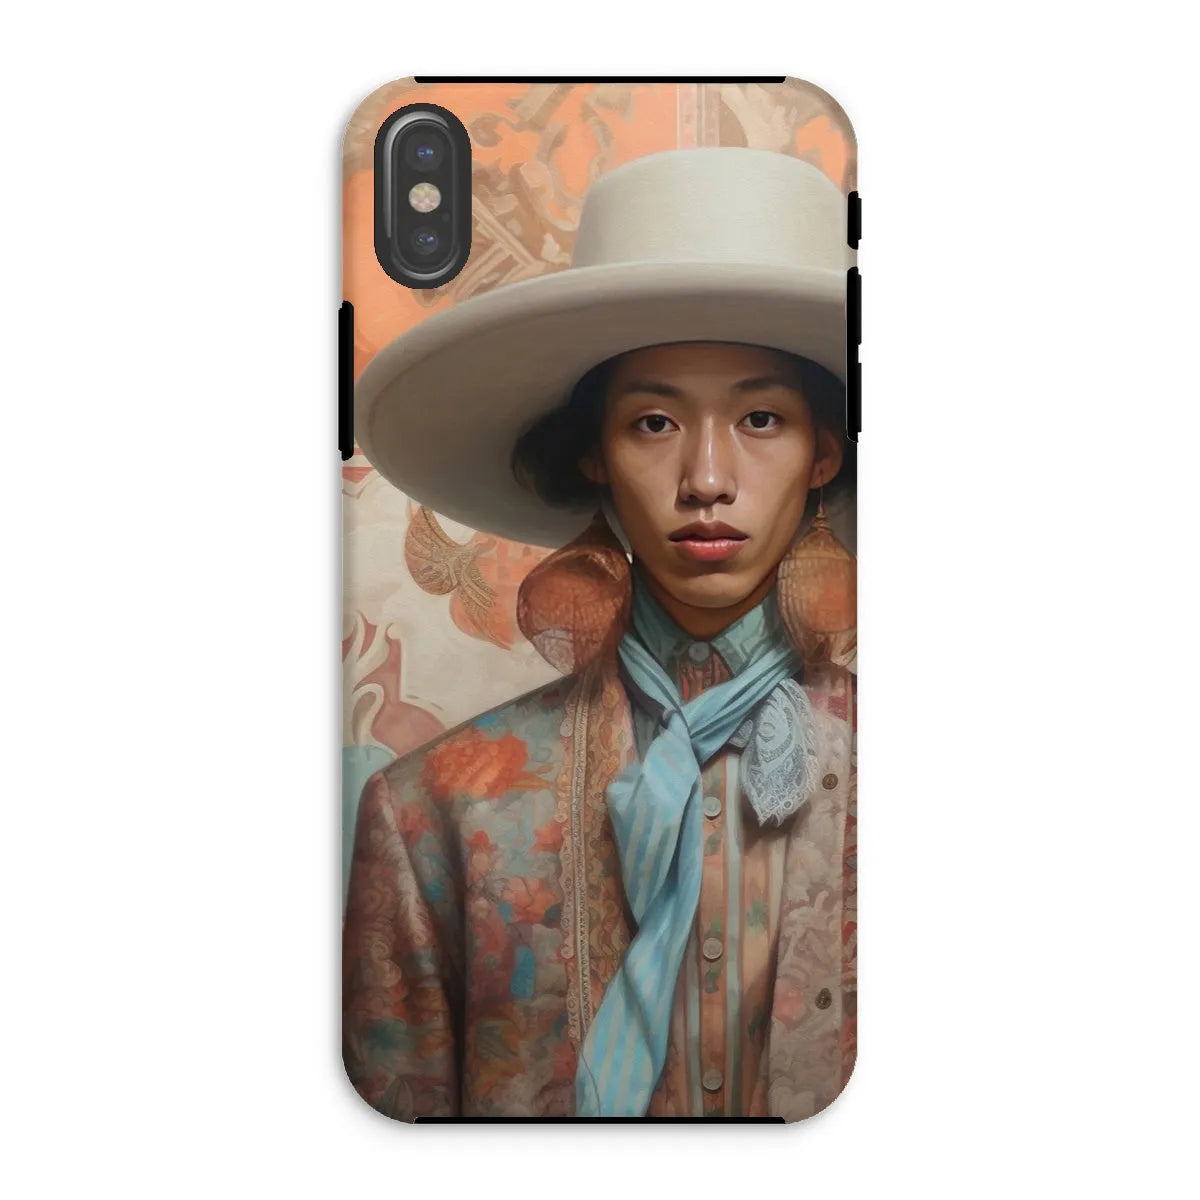 Iyaan - Gay Malay Asian Cowboy Aesthetic Art Phone Case - Iphone Xs / Matte - Mobile Phone Cases - Aesthetic Art